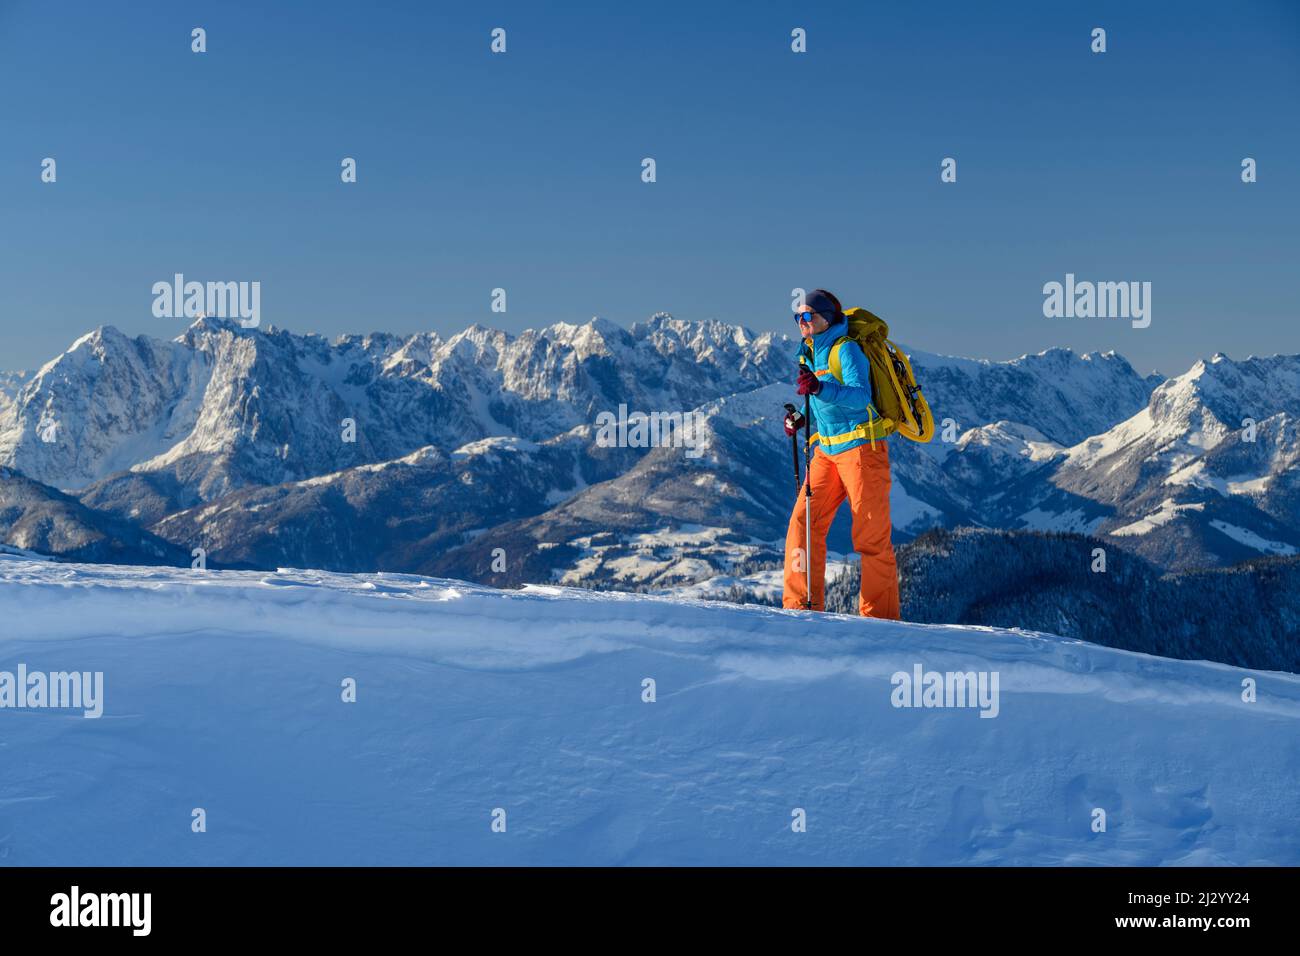 Woman hiking with snowshoes on her backpack goes over snow slope, Kaiser Mountains in the background, Hochgern, Chiemgau Alps, Upper Bavaria, Bavaria, Germany Stock Photo